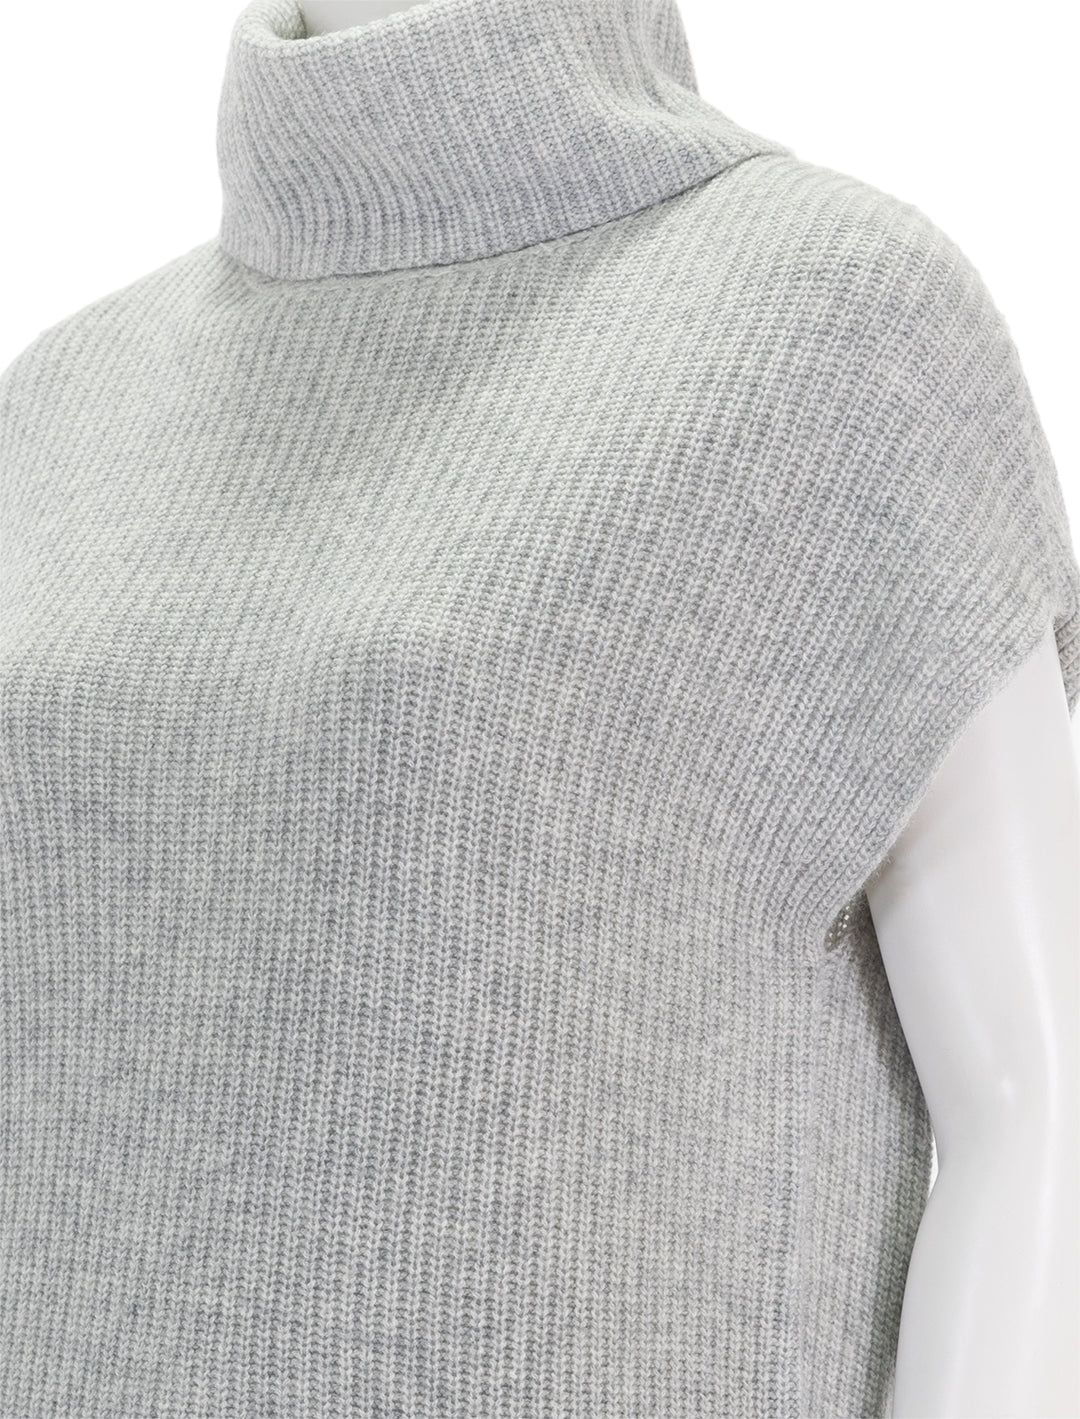 Close-up view of Lilla P.'s ribbed turtleneck sweater in heather grey.